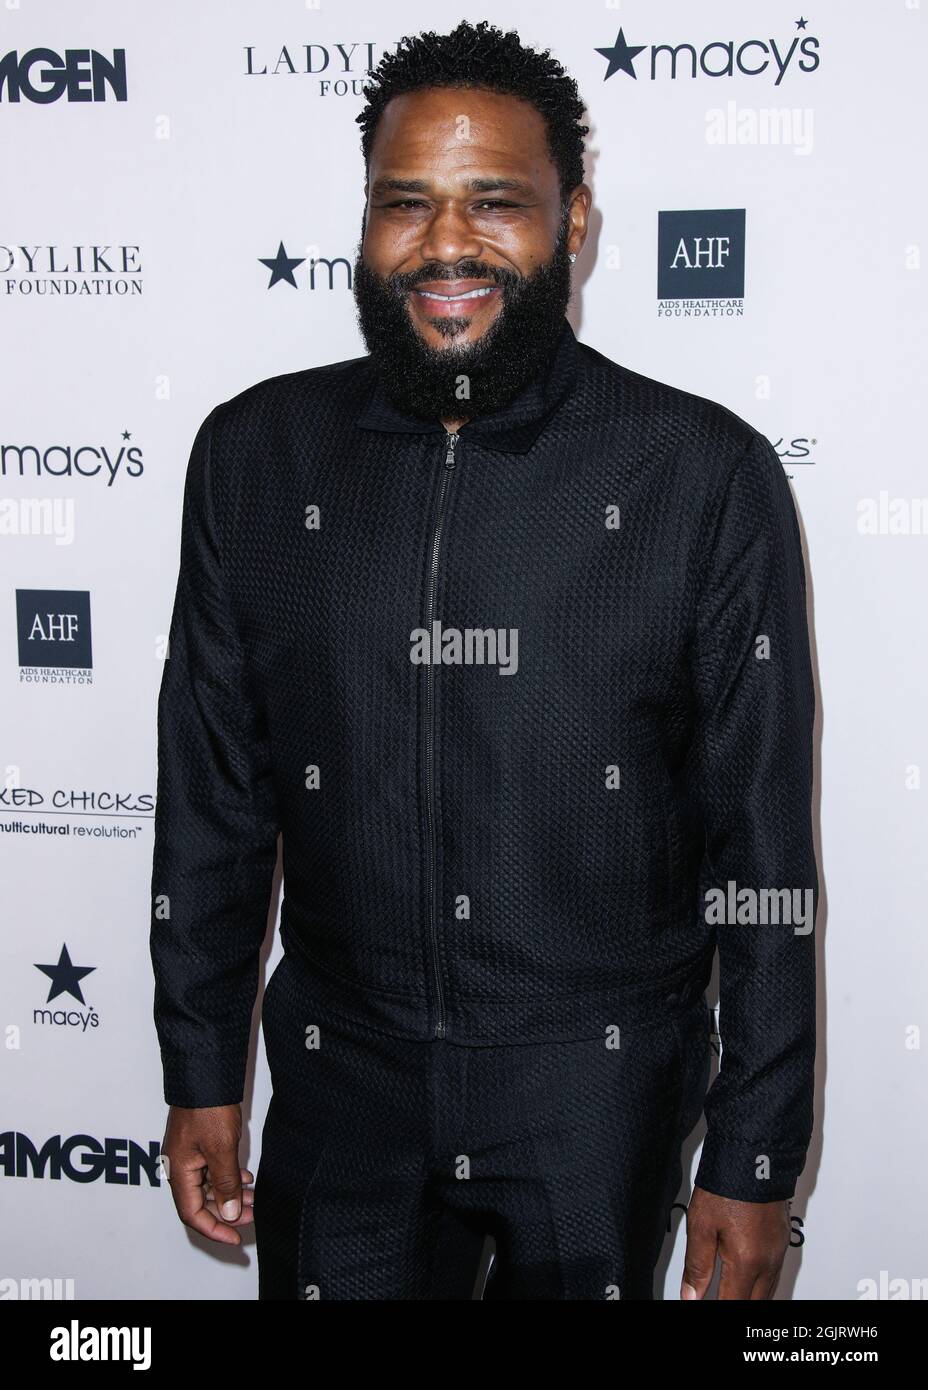 BEVERLY HILLS, LOS ANGELES, CALIFORNIA, USA - SEPTEMBER 11: Actor Anthony Anderson arrives at the 12th Annual LadyLike Foundation Women Of Excellence Awards And Fashion Show held at The Beverly Hilton Hotel on September 11, 2021 in Beverly Hills, Los Angeles, California, United States. (Photo by Xavier Collin/Image Press Agency) Stock Photo